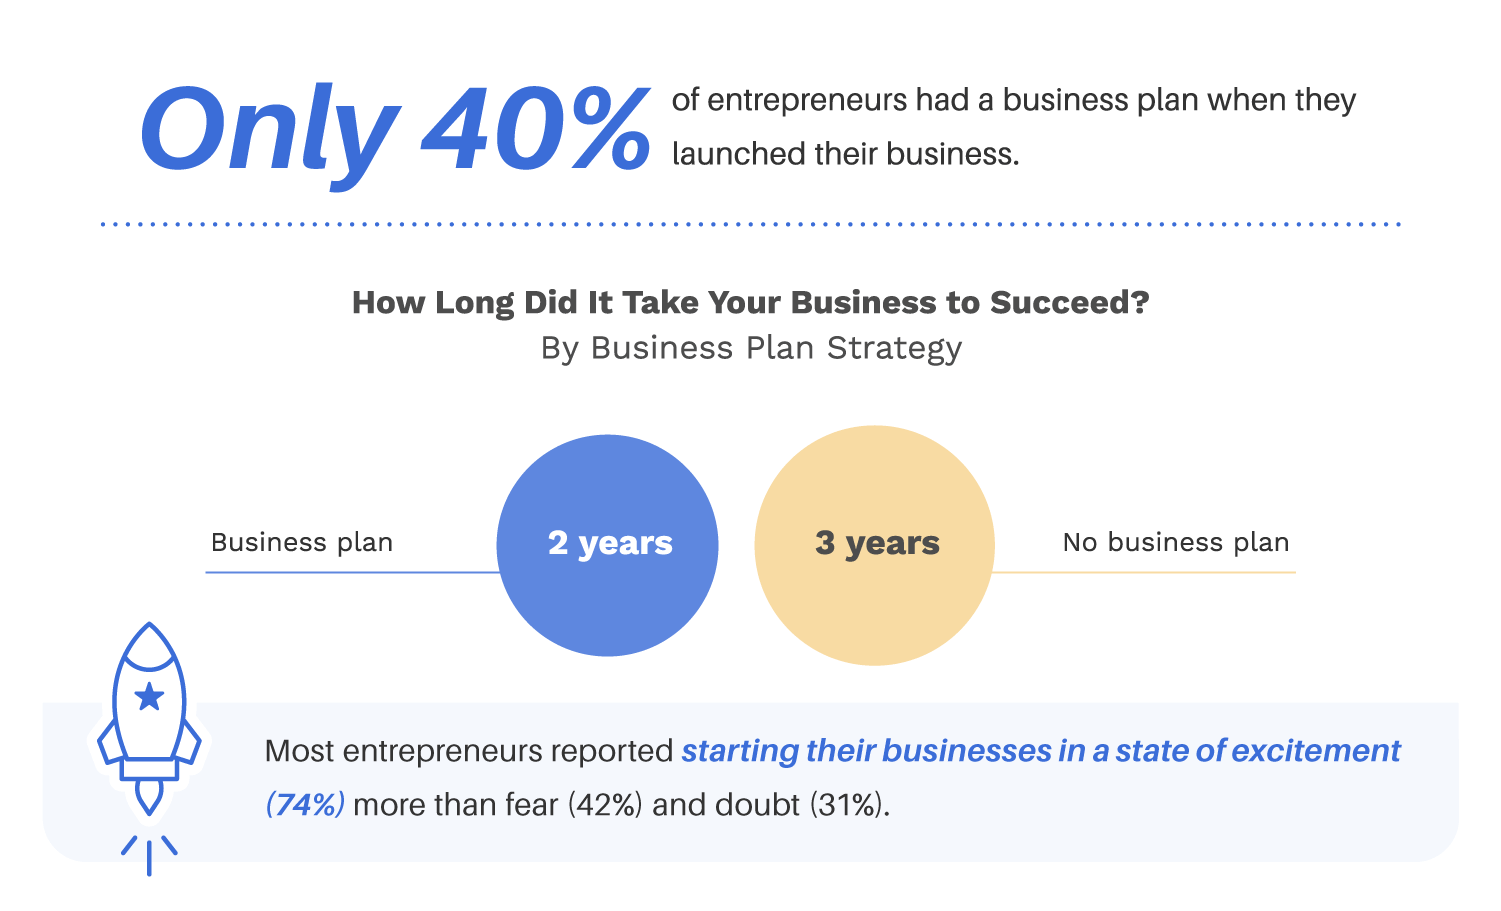 How many had a Business Plan